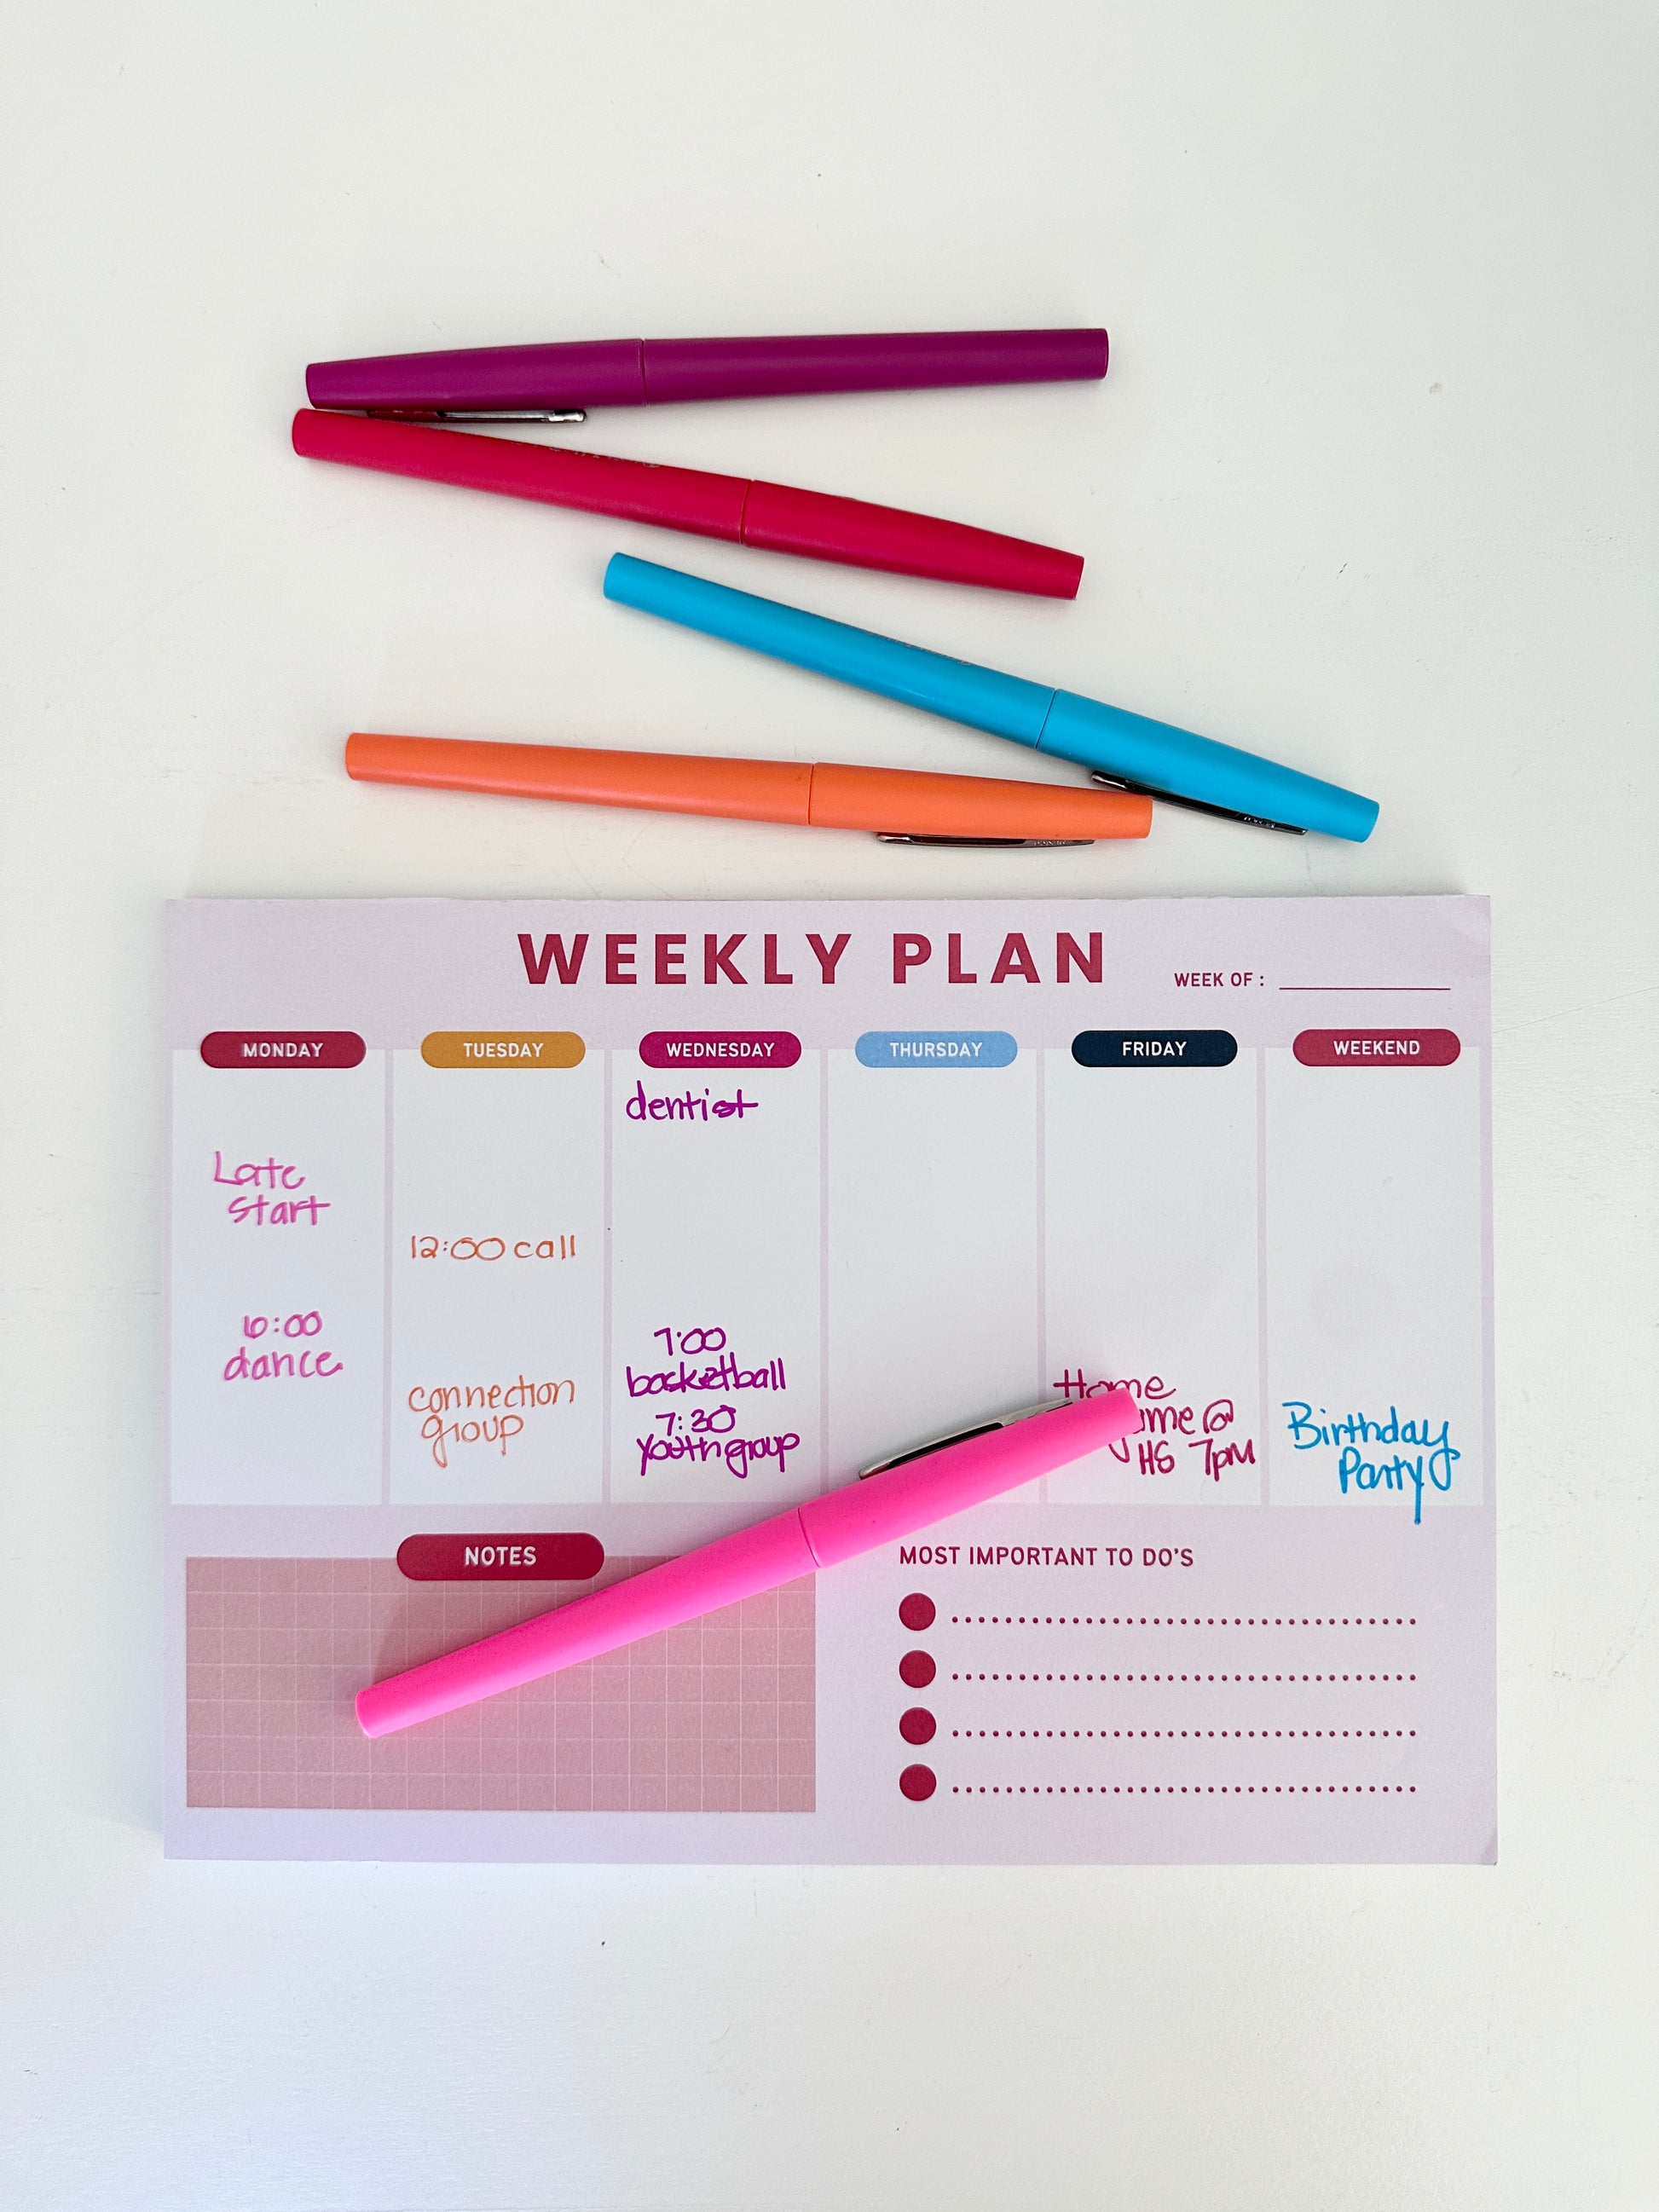 mage of Simple Purposeful Living Weekly Planner Notepad Bundle - Six Notepads for Weekly Planning, Buy 5 Get 1 Free, Free Shipping, Ideal Gift for Teachers, Graduates, Moms. Modern Design, Ample Space, Undated Calendar System, High-Quality Paper.